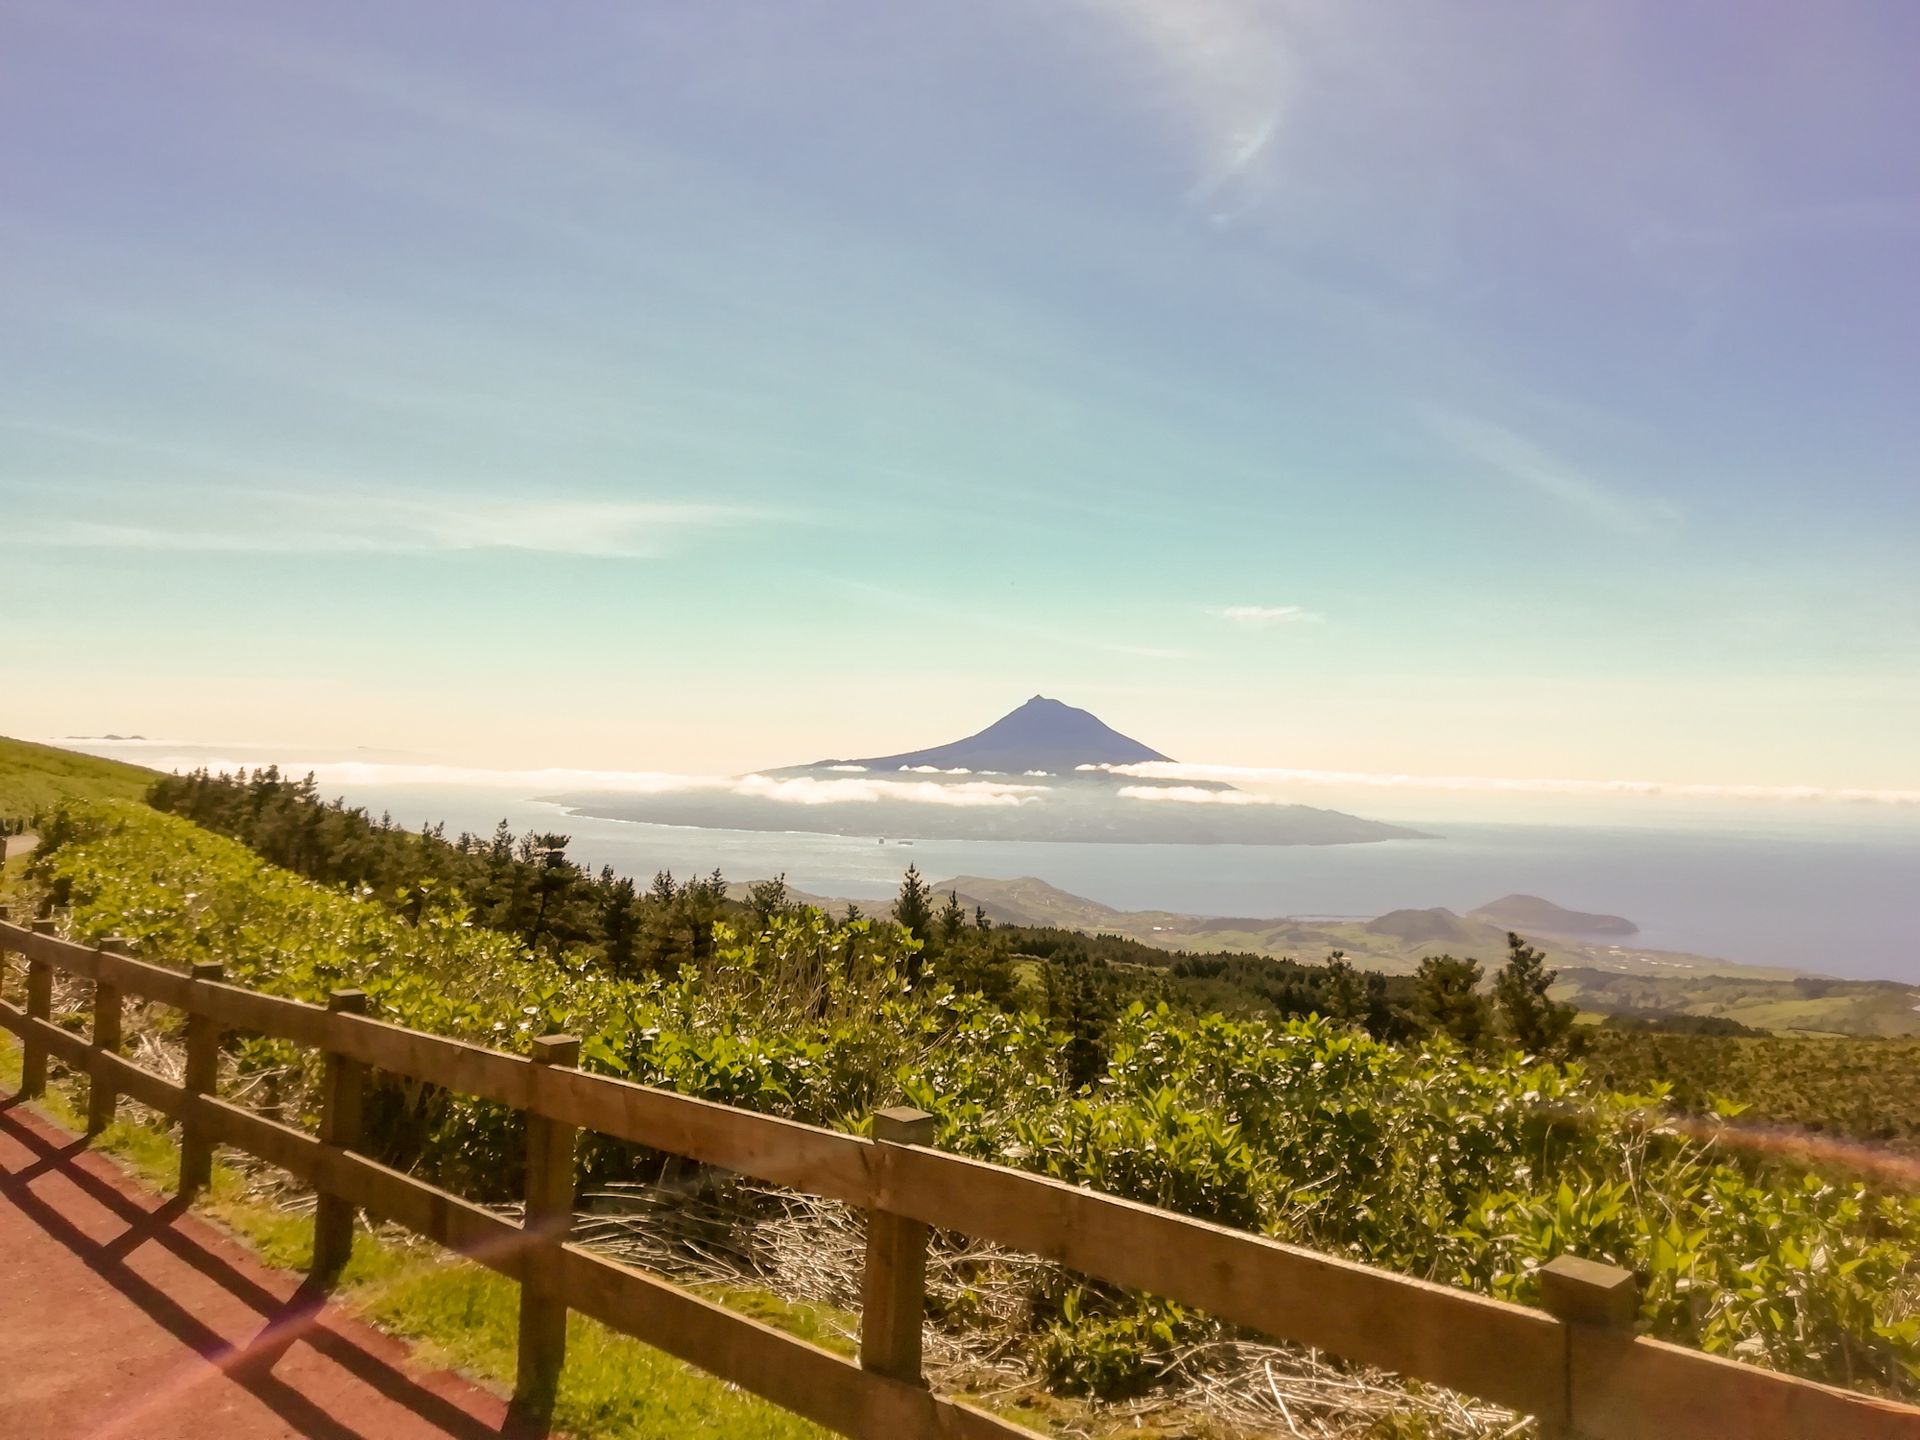 Visit the Caldeira do Faial with a view of Pico on our half-day Excursions, Tours and Guided Visits on the island of Faial Azores.